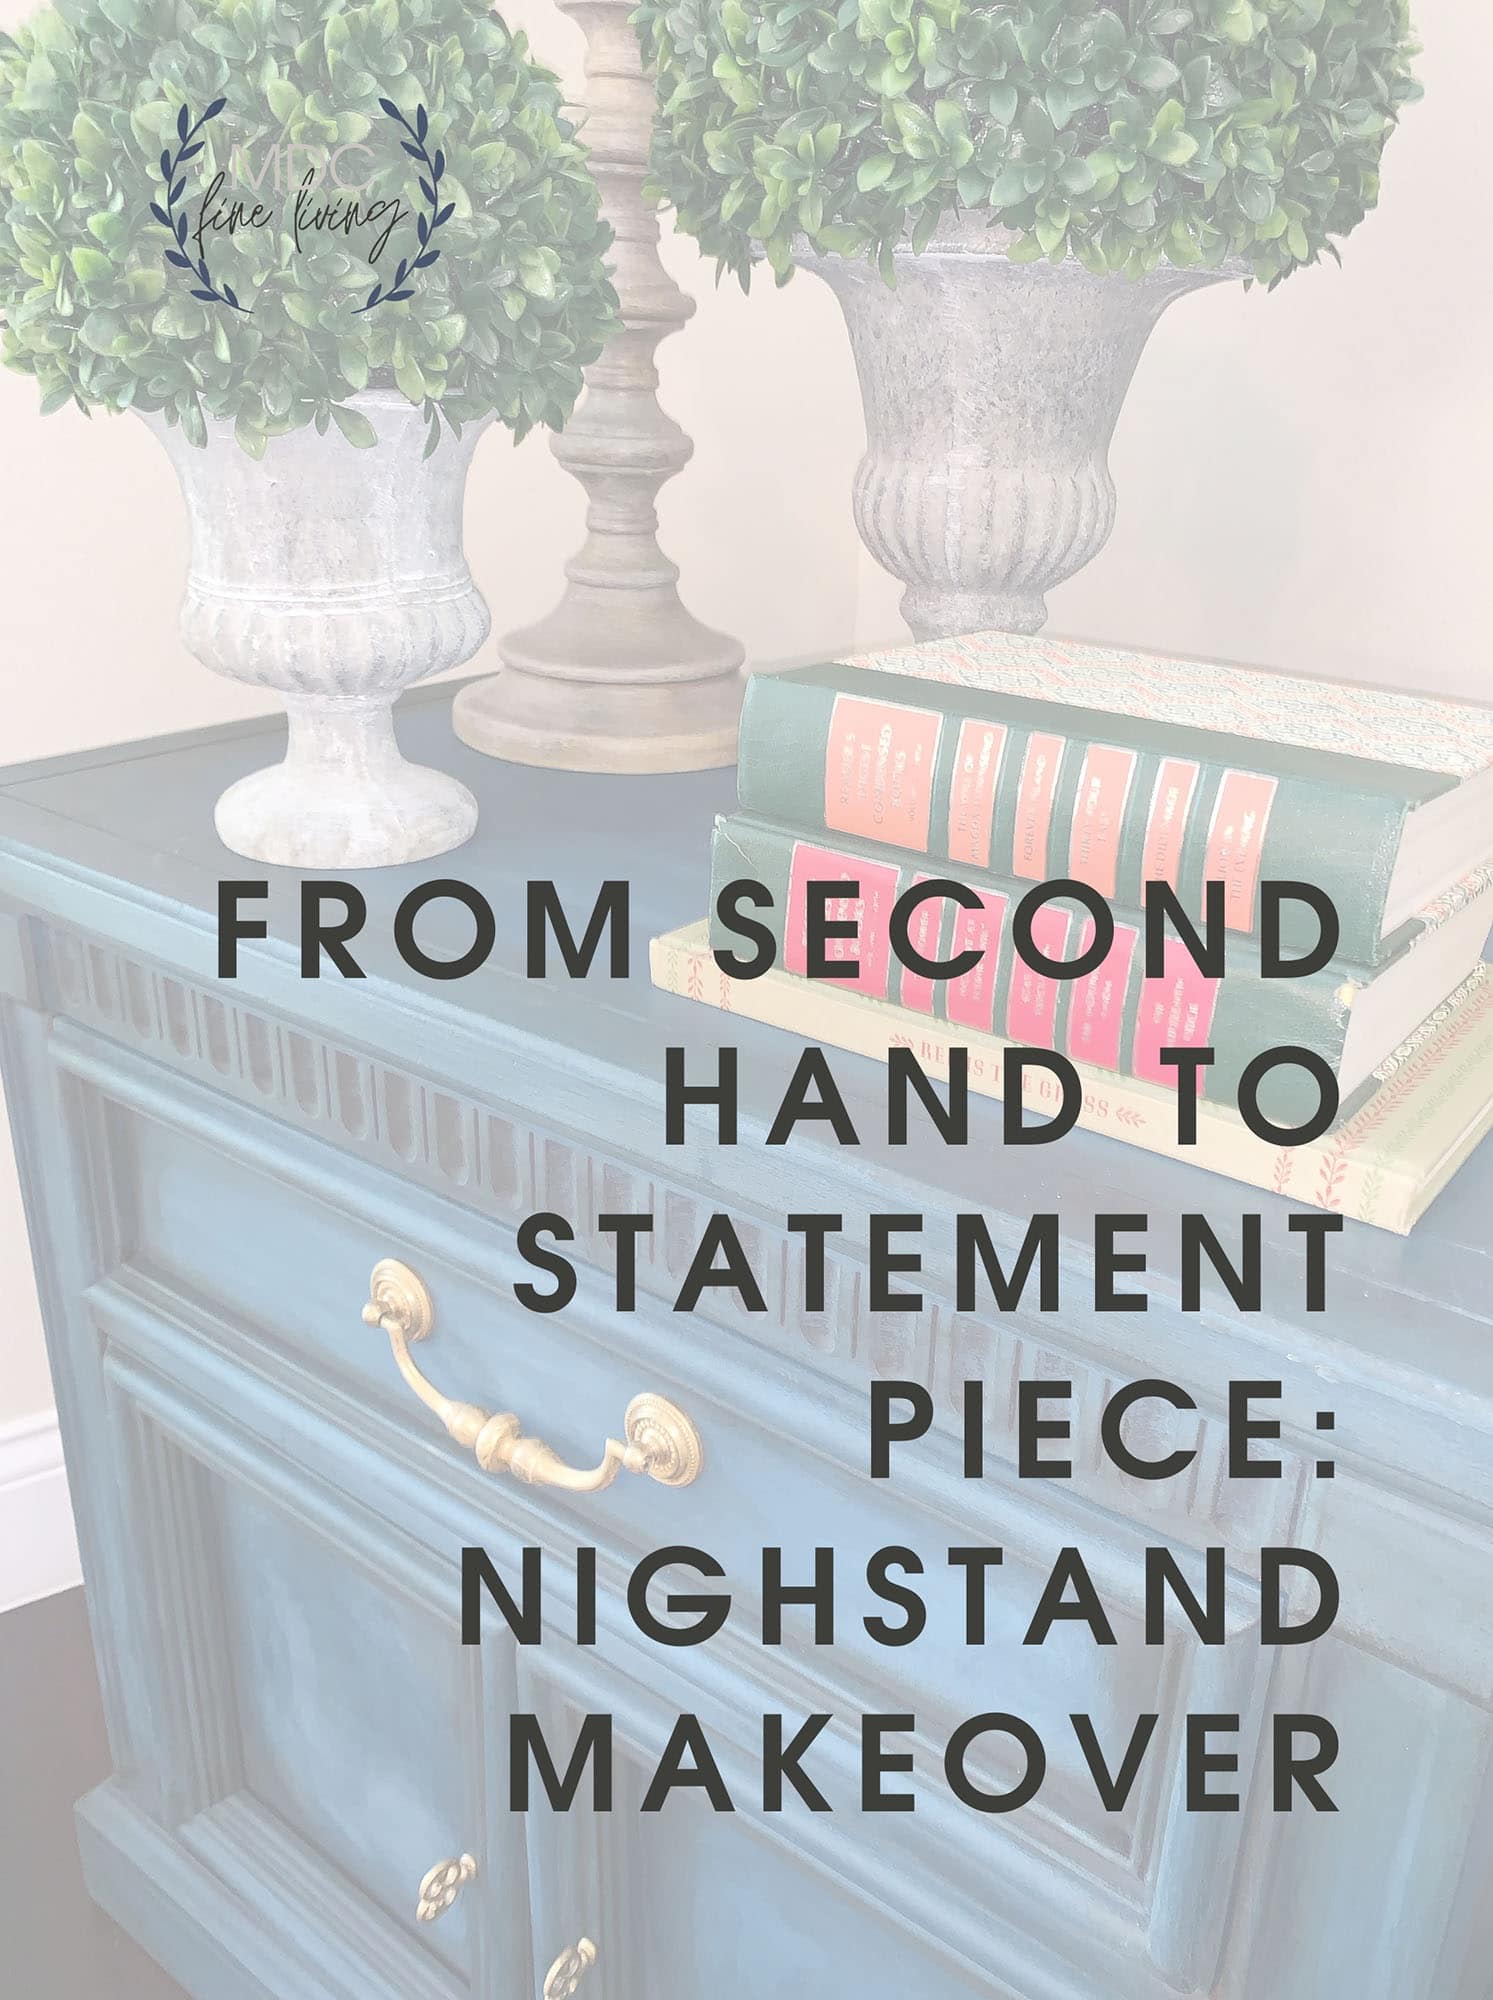 Title card for post that reads, "From Second Hand to Statement Piece."